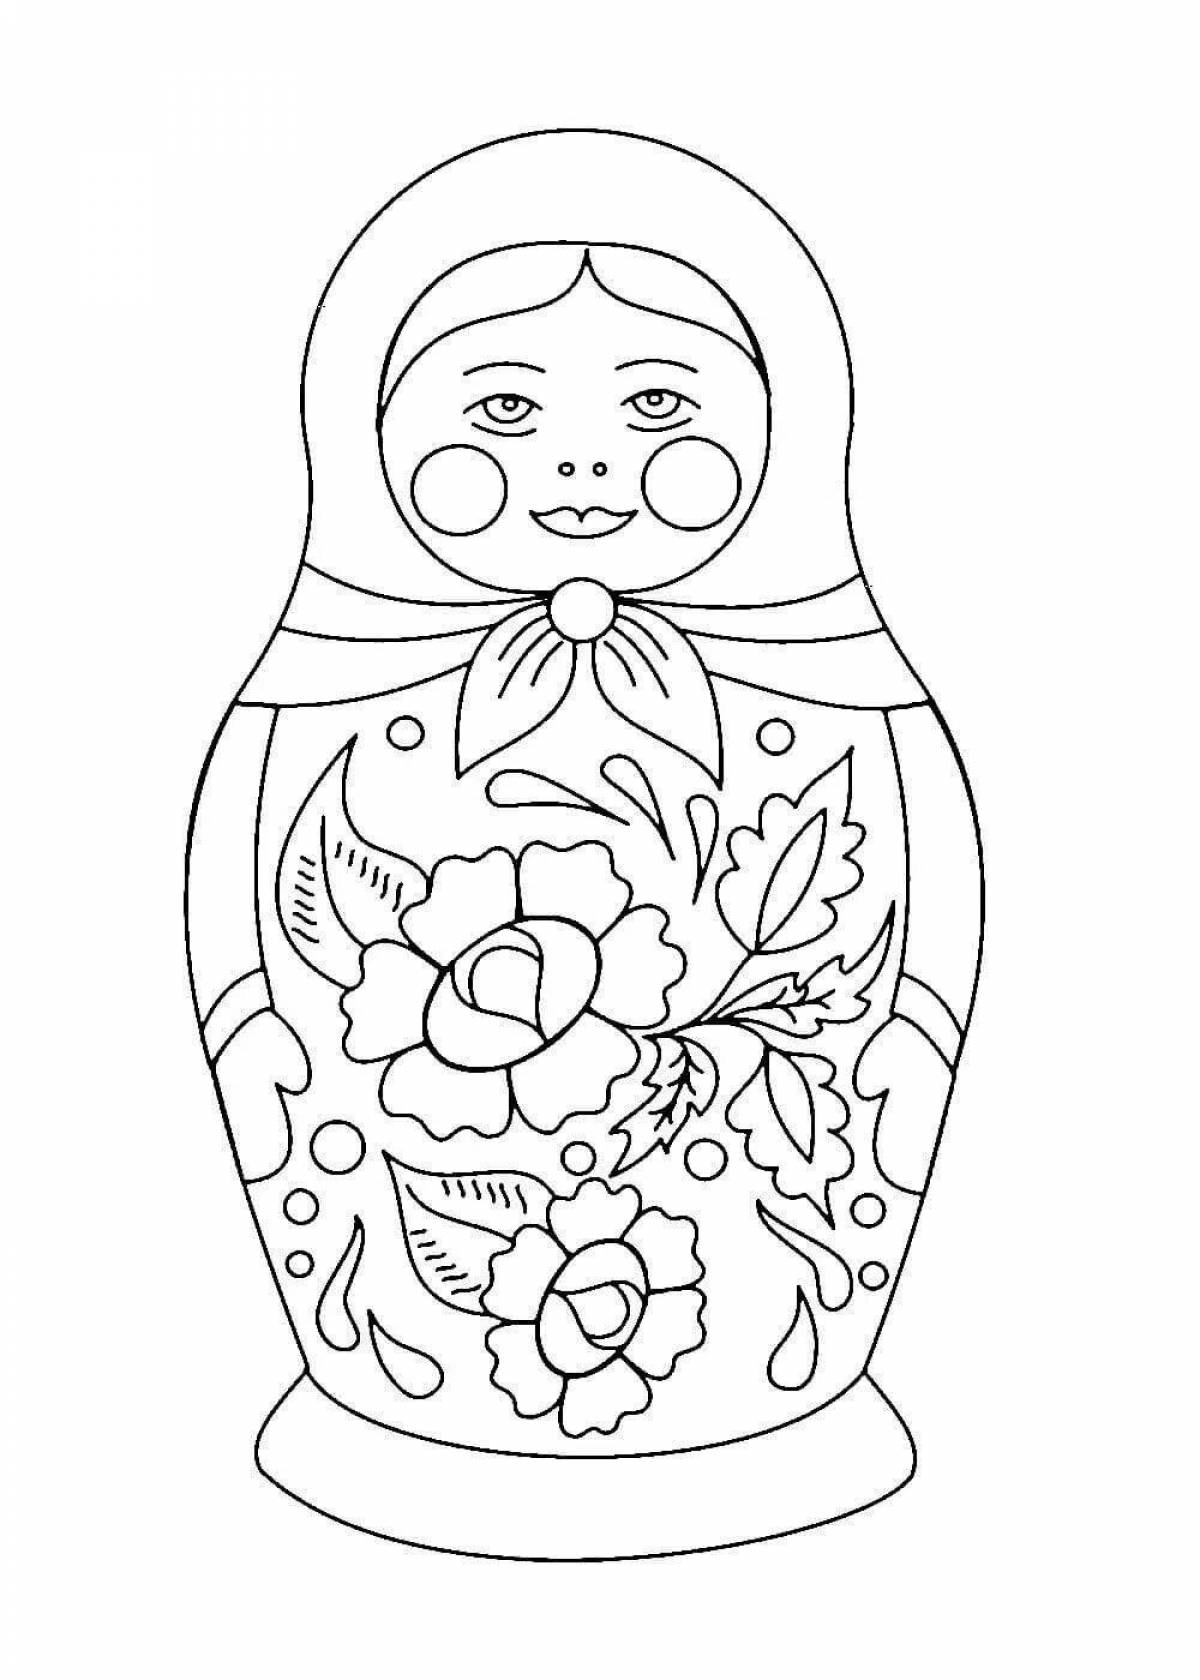 A fun coloring book with a pattern of nesting dolls for children 5-6 years old